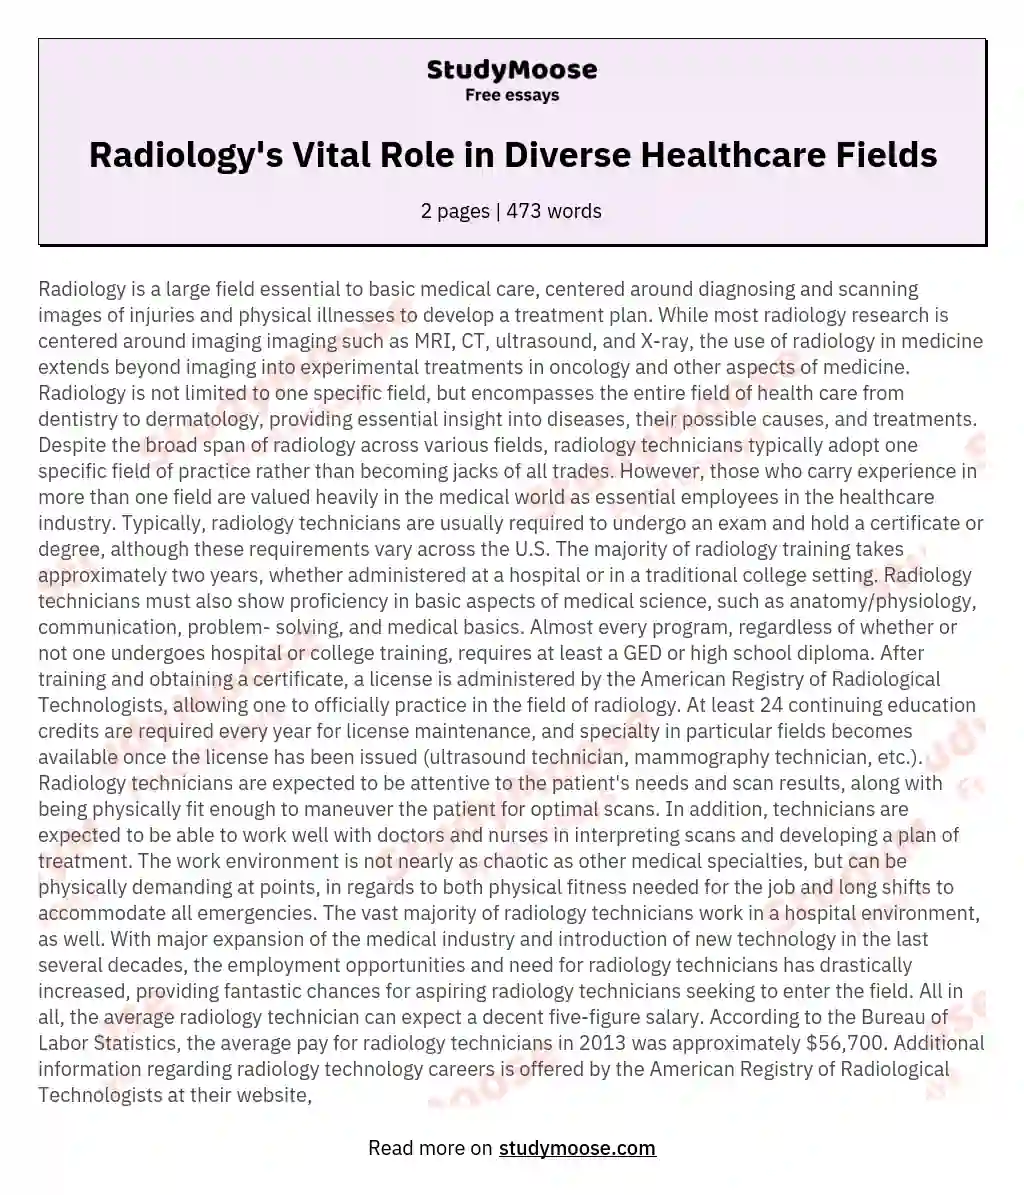 Radiology's Vital Role in Diverse Healthcare Fields essay